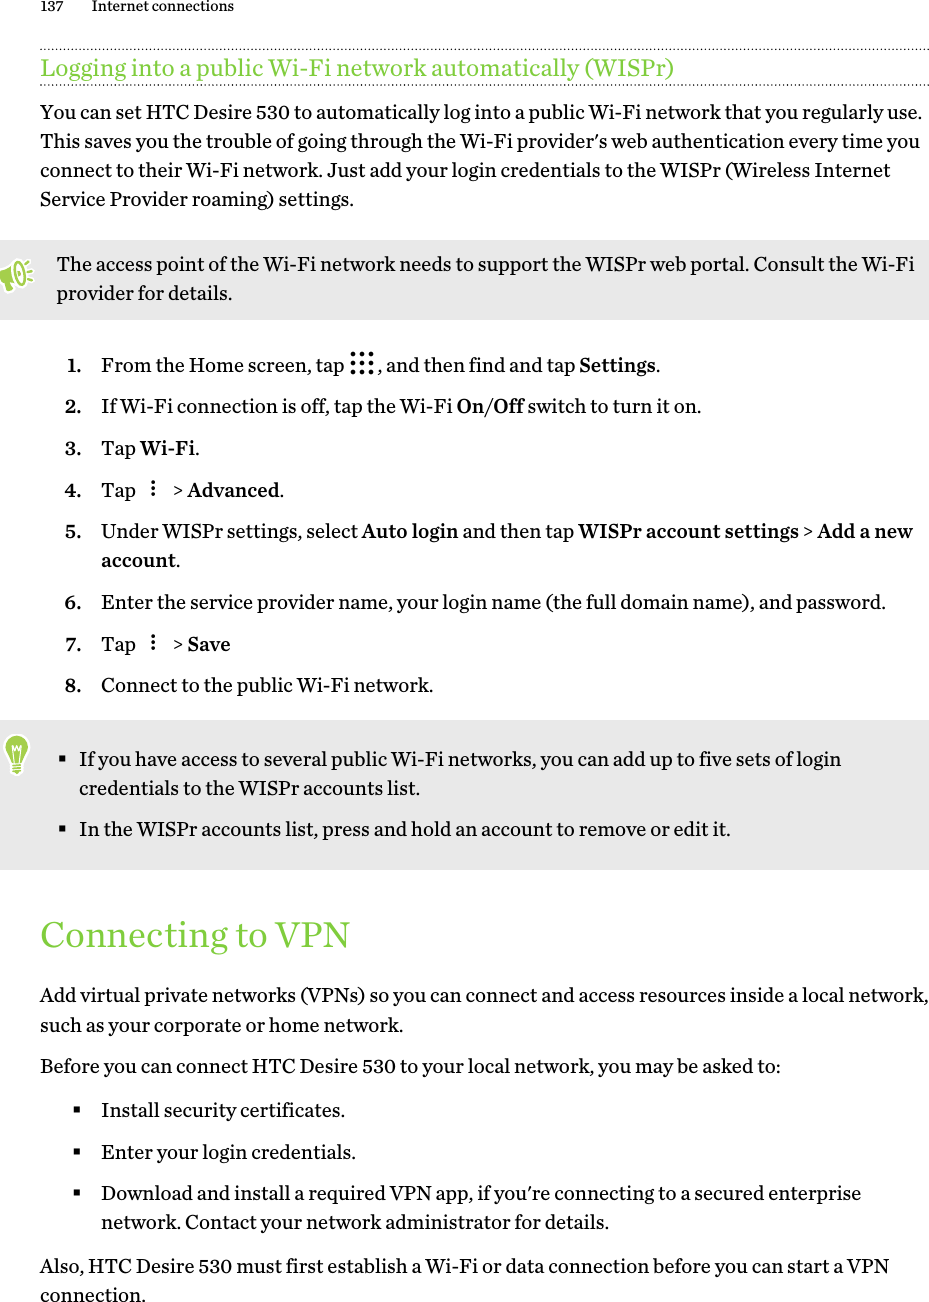 Logging into a public Wi-Fi network automatically (WISPr)You can set HTC Desire 530 to automatically log into a public Wi-Fi network that you regularly use.This saves you the trouble of going through the Wi-Fi provider&apos;s web authentication every time youconnect to their Wi-Fi network. Just add your login credentials to the WISPr (Wireless InternetService Provider roaming) settings.The access point of the Wi-Fi network needs to support the WISPr web portal. Consult the Wi-Fiprovider for details.1. From the Home screen, tap  , and then find and tap Settings.2. If Wi-Fi connection is off, tap the Wi-Fi On/Off switch to turn it on.3. Tap Wi-Fi.4. Tap   &gt; Advanced.5. Under WISPr settings, select Auto login and then tap WISPr account settings &gt; Add a newaccount.6. Enter the service provider name, your login name (the full domain name), and password.7. Tap   &gt; Save8. Connect to the public Wi-Fi network.§If you have access to several public Wi-Fi networks, you can add up to five sets of logincredentials to the WISPr accounts list.§In the WISPr accounts list, press and hold an account to remove or edit it.Connecting to VPNAdd virtual private networks (VPNs) so you can connect and access resources inside a local network,such as your corporate or home network.Before you can connect HTC Desire 530 to your local network, you may be asked to:§Install security certificates.§Enter your login credentials.§Download and install a required VPN app, if you&apos;re connecting to a secured enterprisenetwork. Contact your network administrator for details.Also, HTC Desire 530 must first establish a Wi-Fi or data connection before you can start a VPNconnection.137 Internet connections